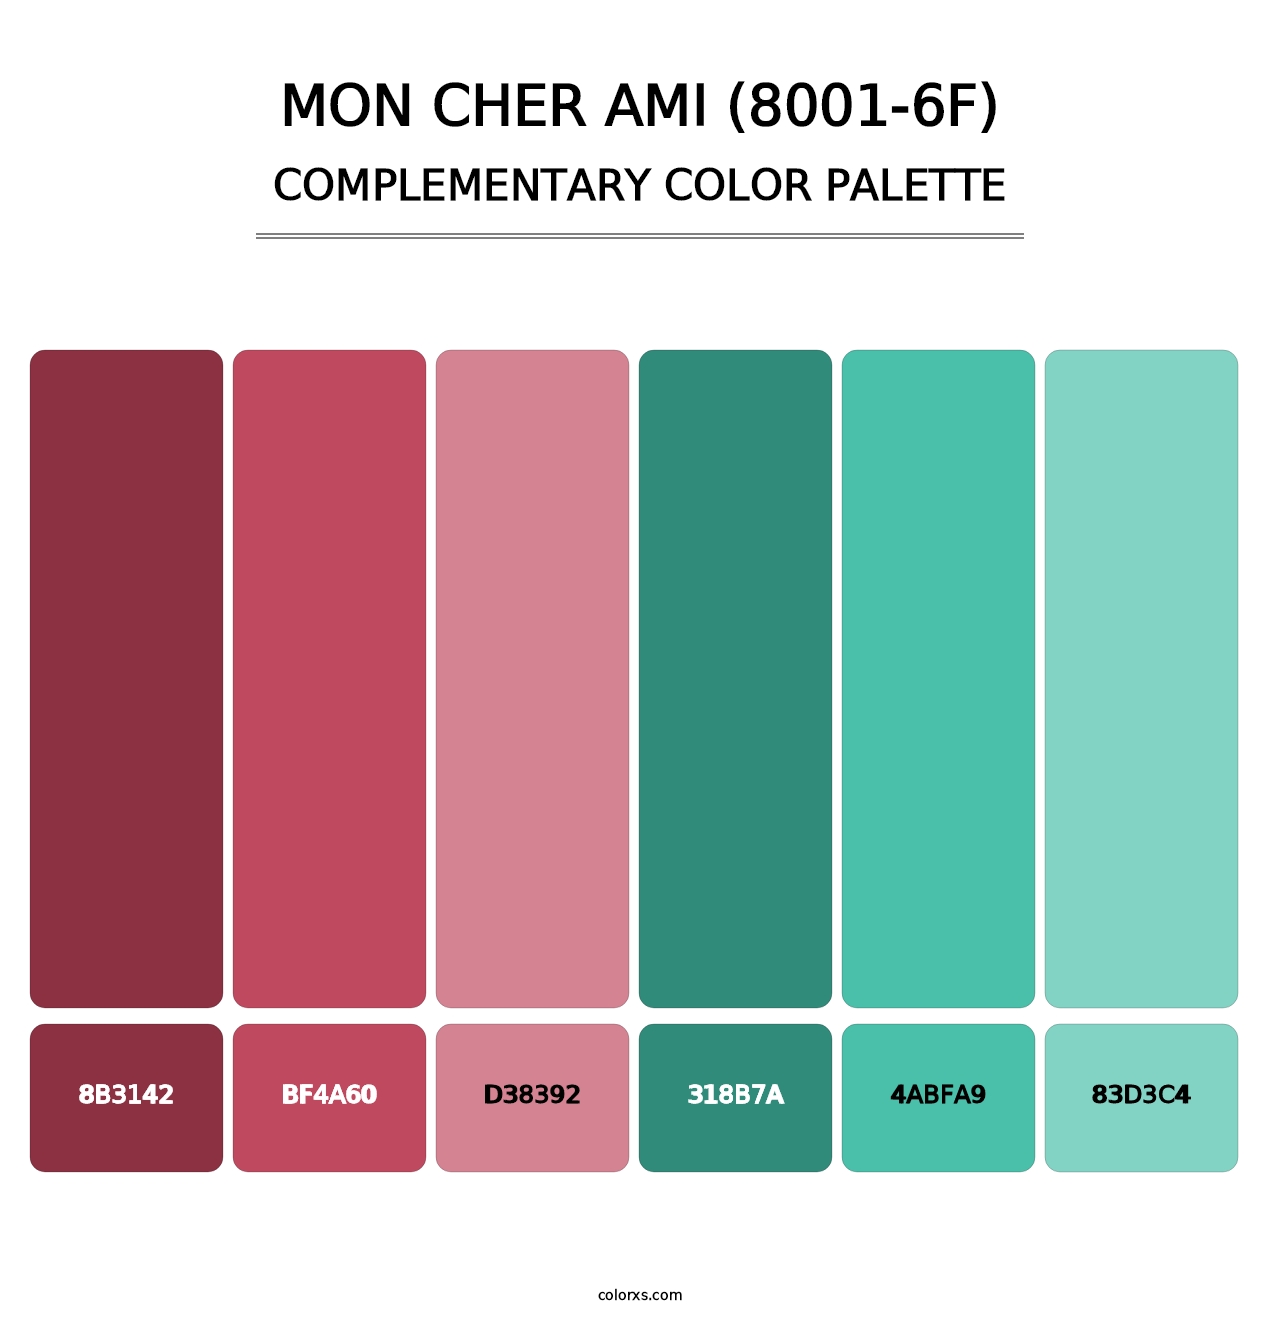 Mon Cher Ami (8001-6F) - Complementary Color Palette